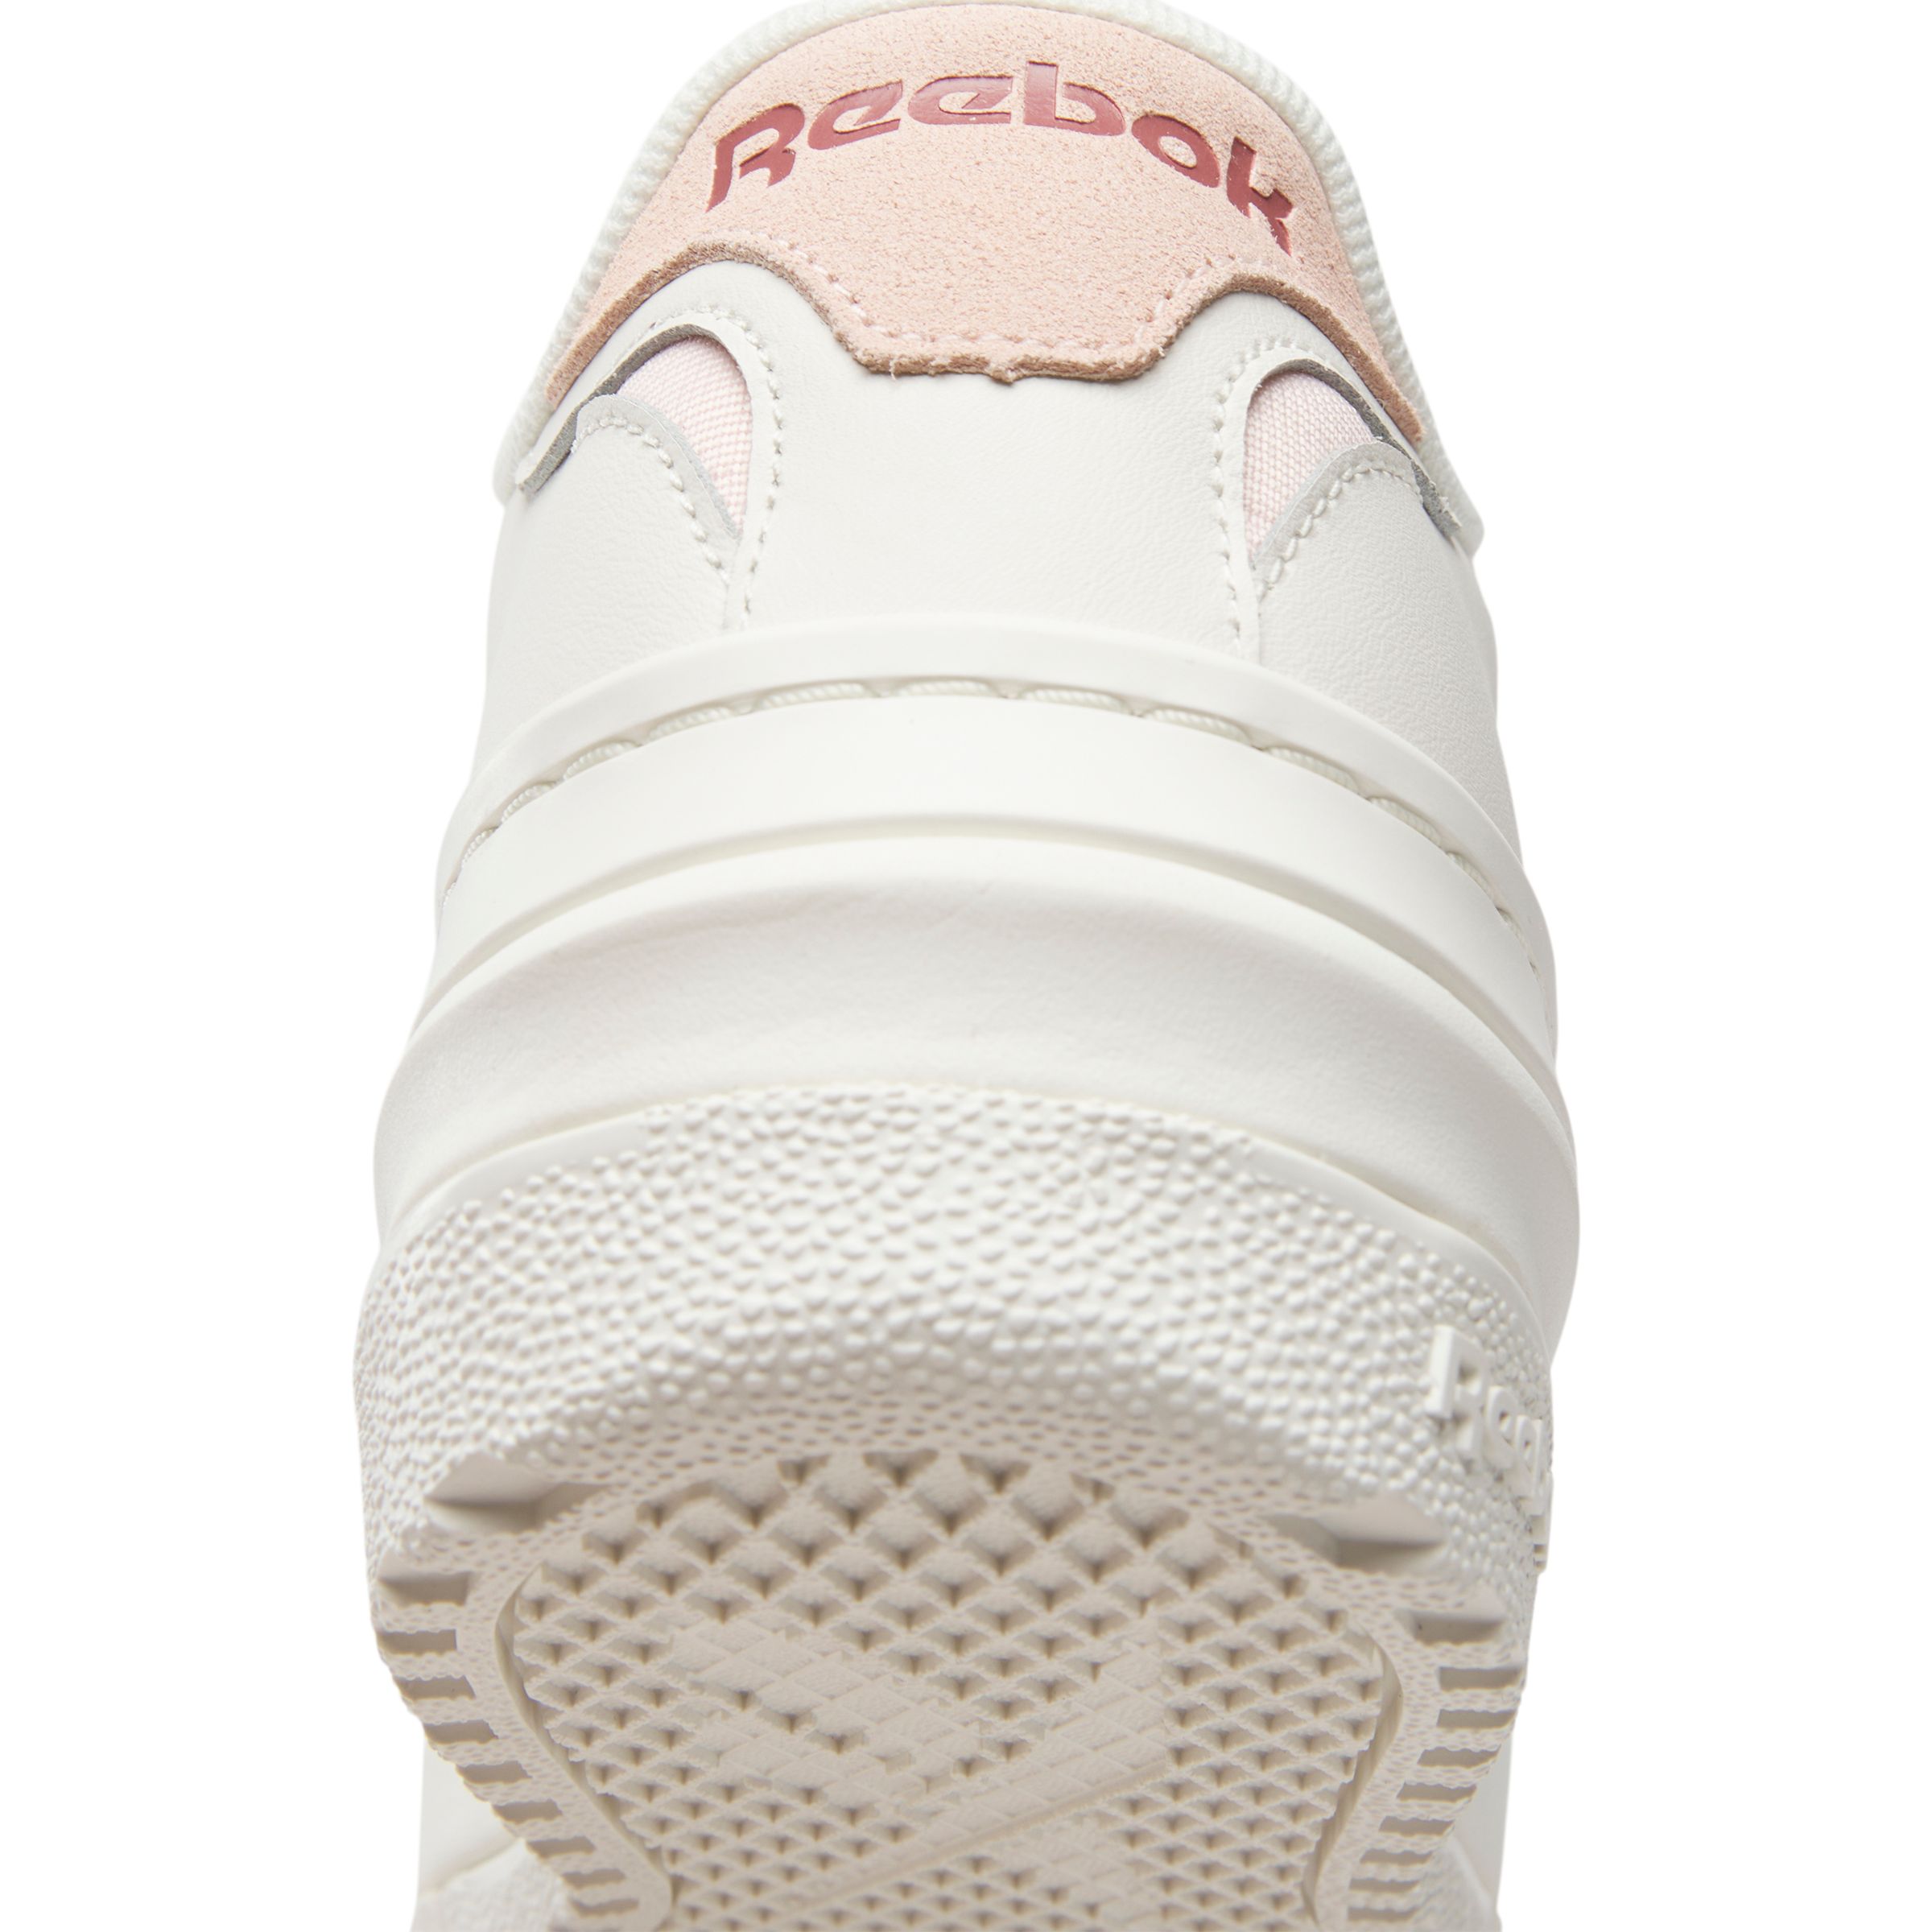 Reebok Women's Club 85 Foundation Shoes, Sneakers, Low Top, Casual